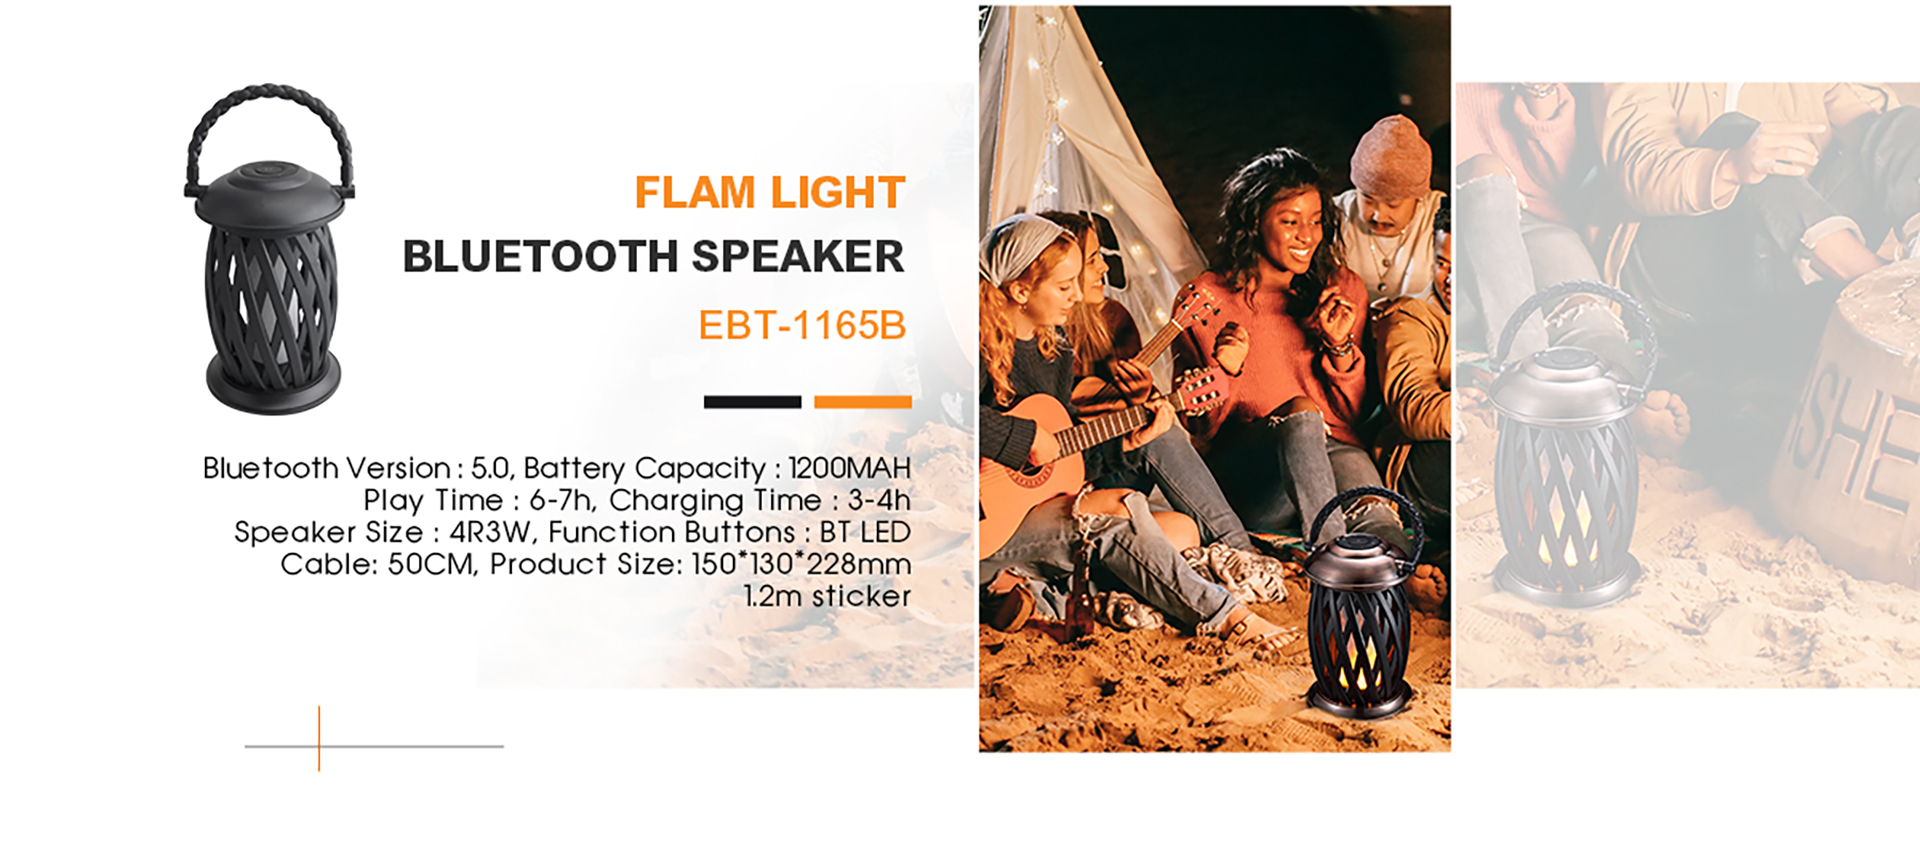 flam light with bluetooth speaker for outdoor camping night